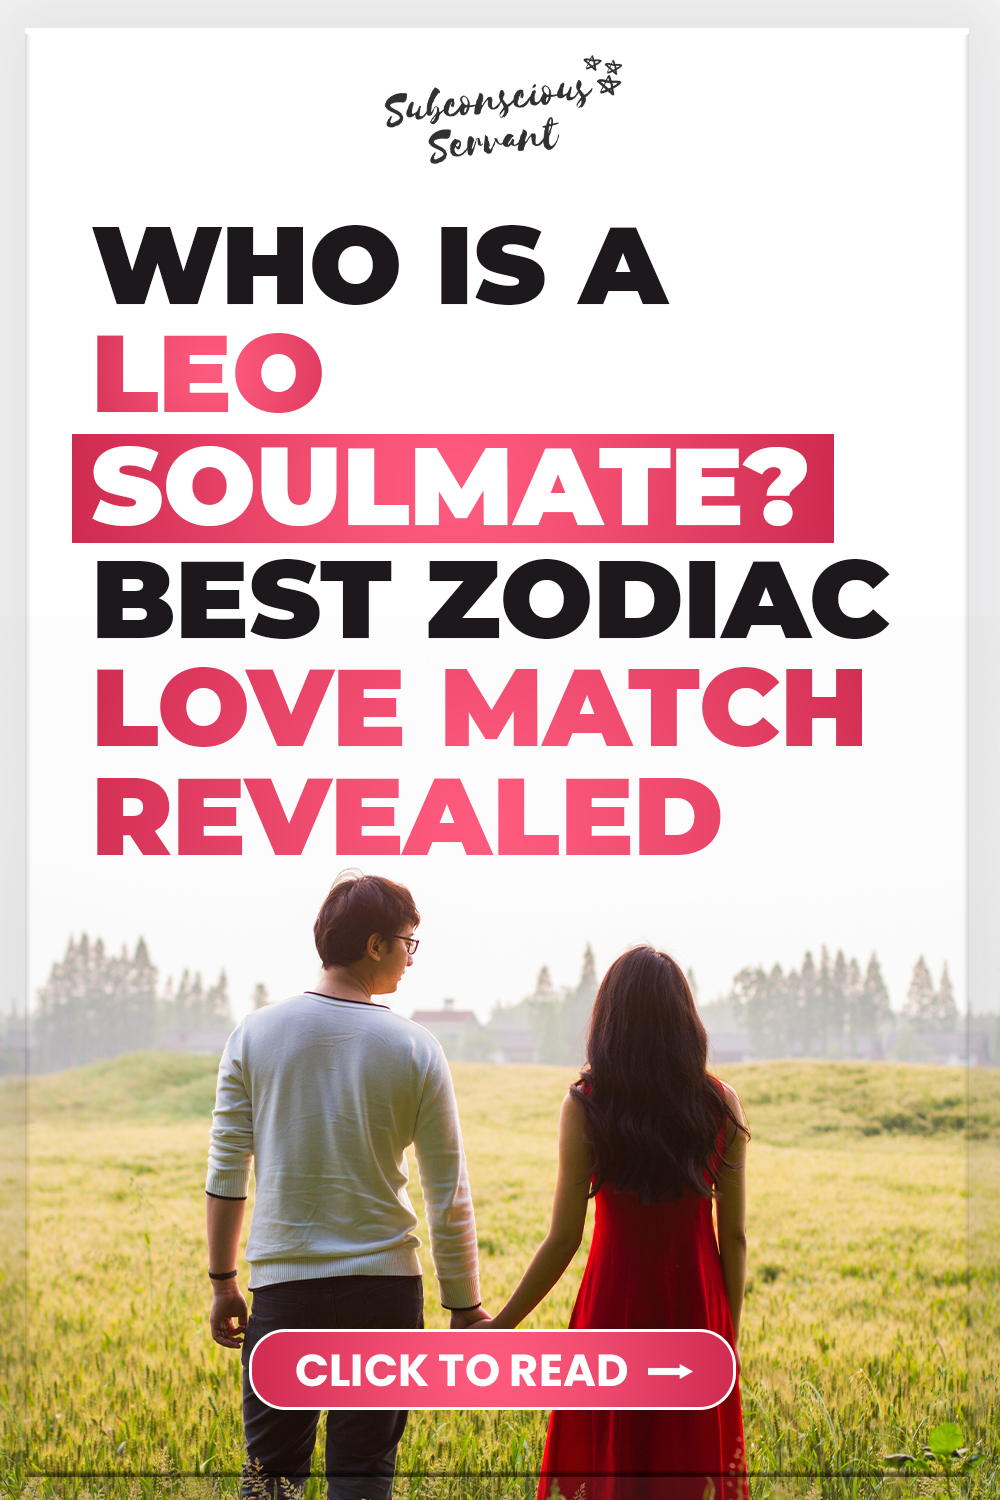 Who Is A Leo Soulmate? Best Zodiac Love Match Revealed